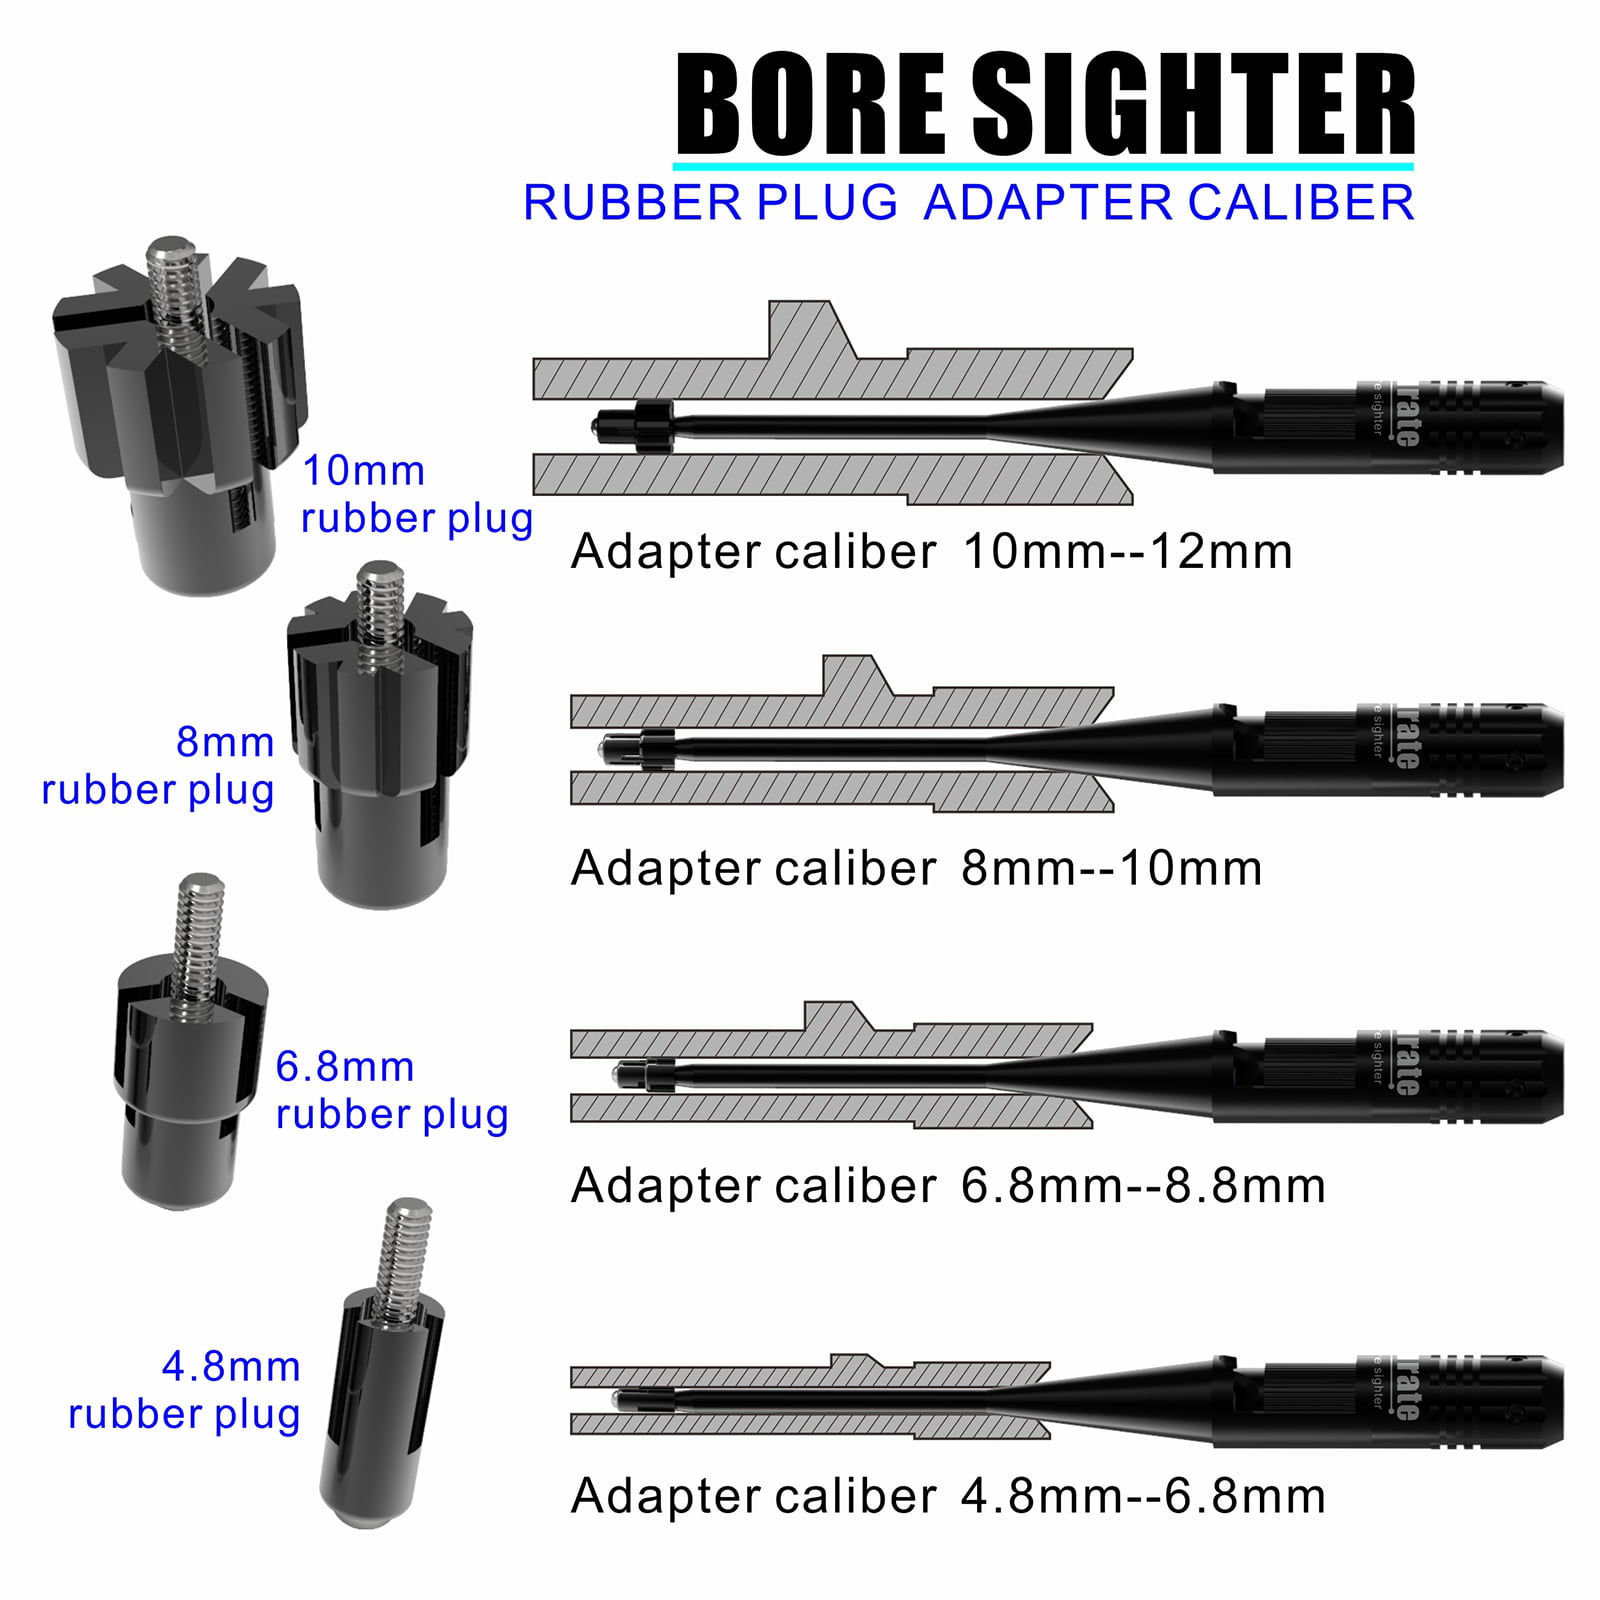 Laser Bore Sighter Bore Sight Kit Multiple Caliber The Parter with Your .18 to .69 Rifles Pistols.Red Laser Sight with Button Switch Provide The Powerful Support for Hunting. 